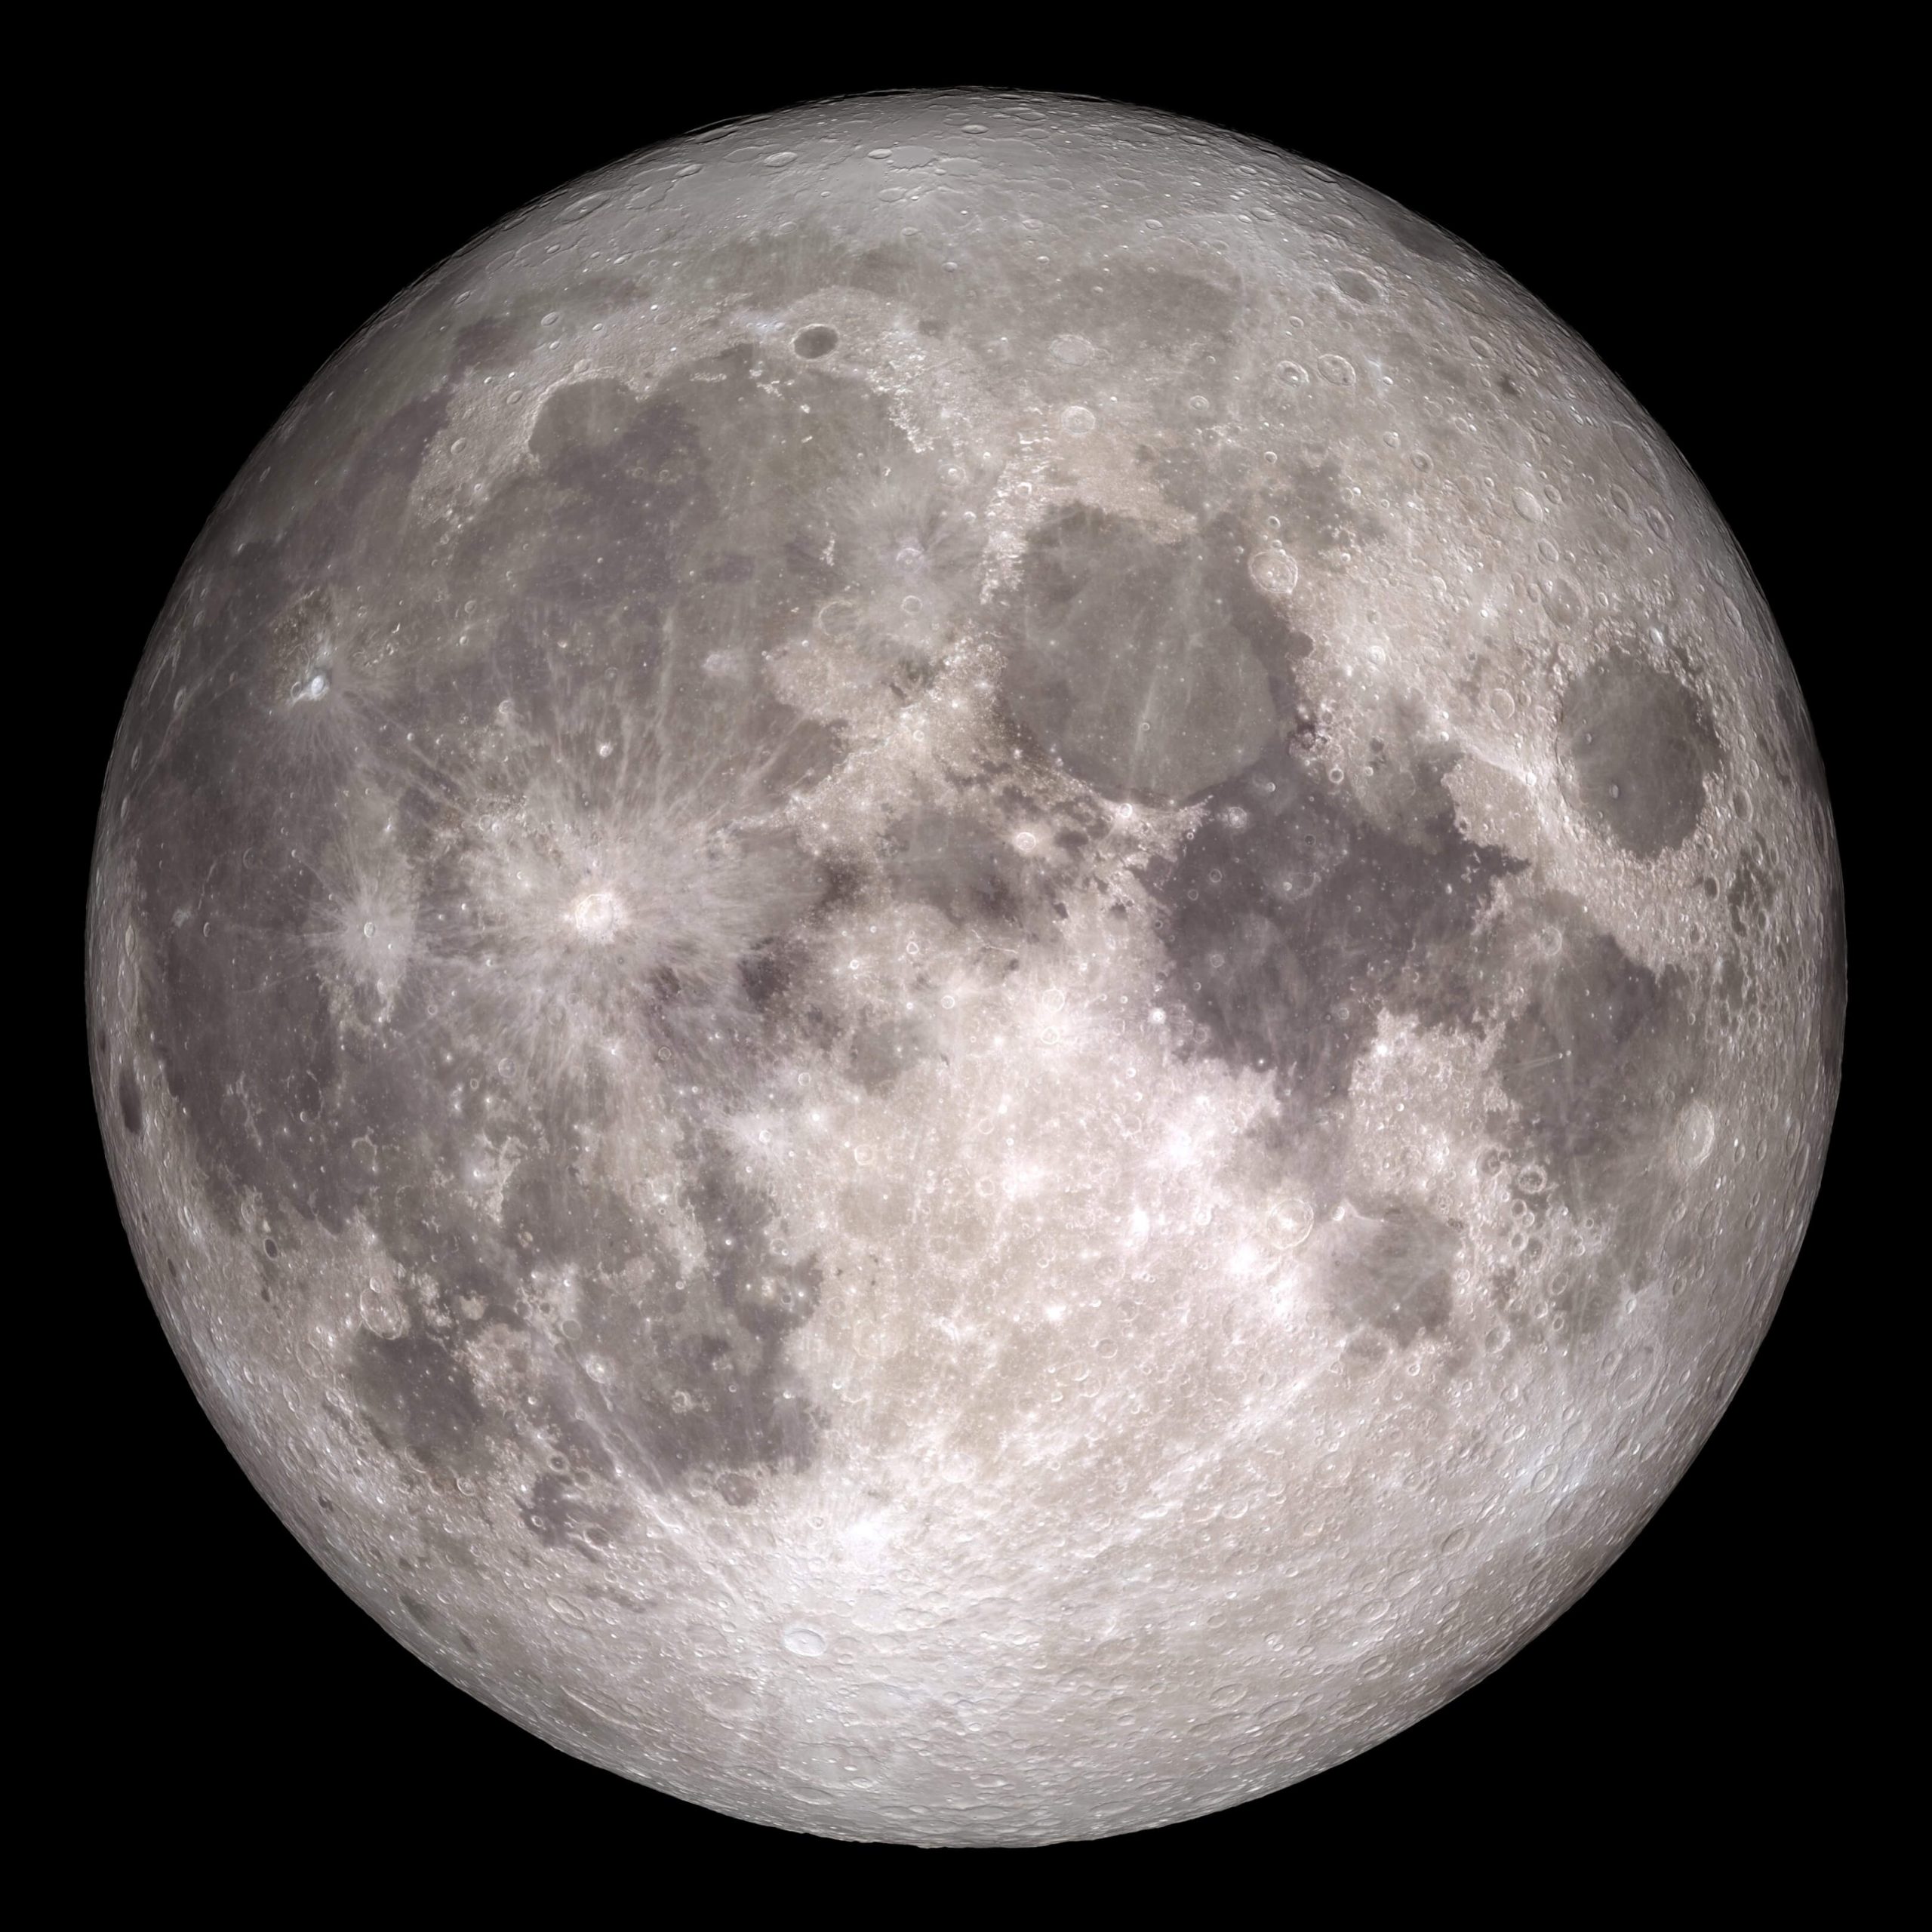 Ep. 575: Observing the Moon